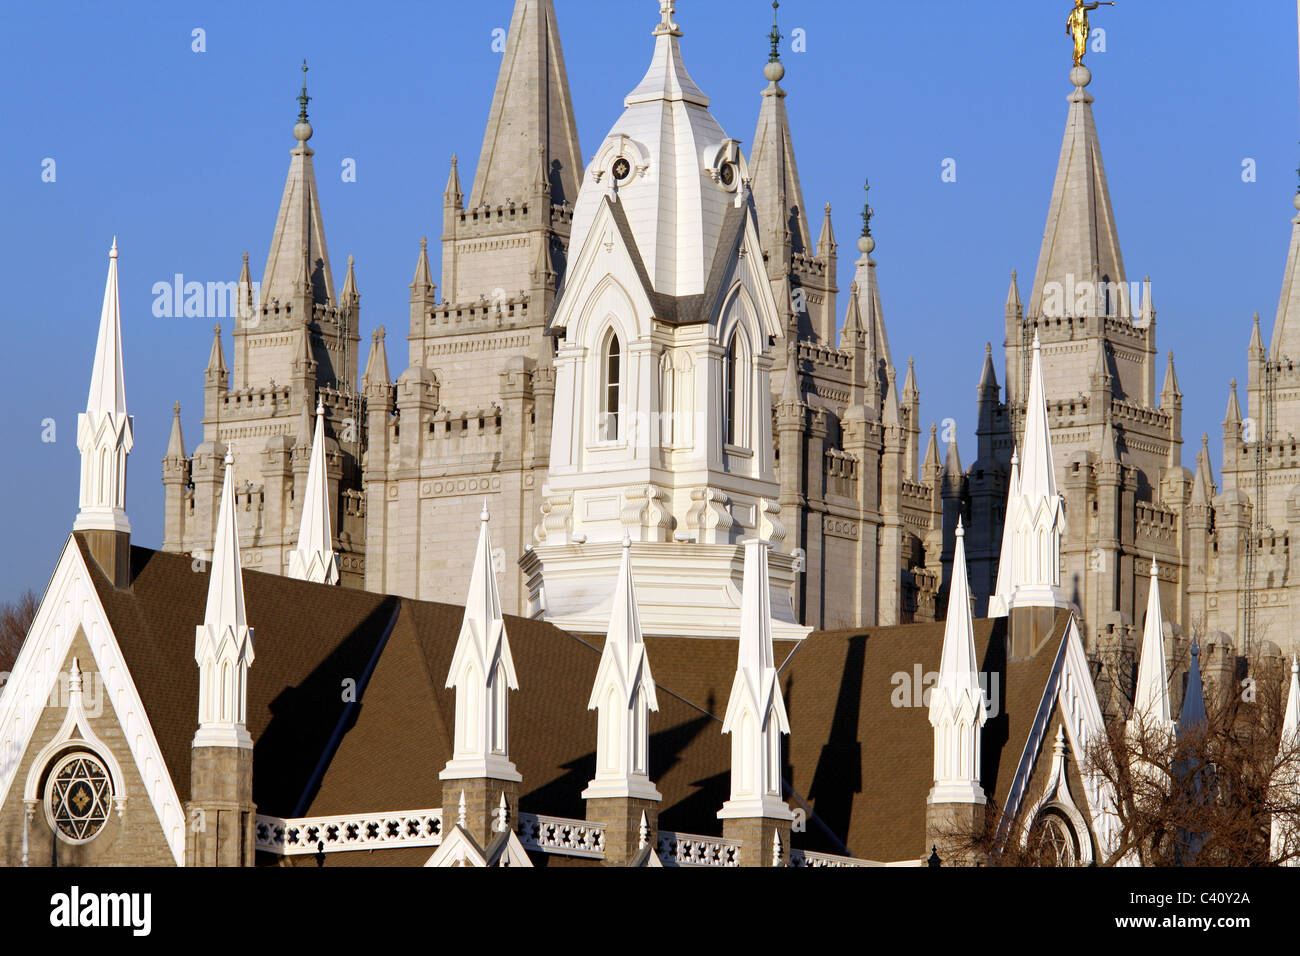 View Of Assembly Hall And Salt Lake Temple Inside Temple